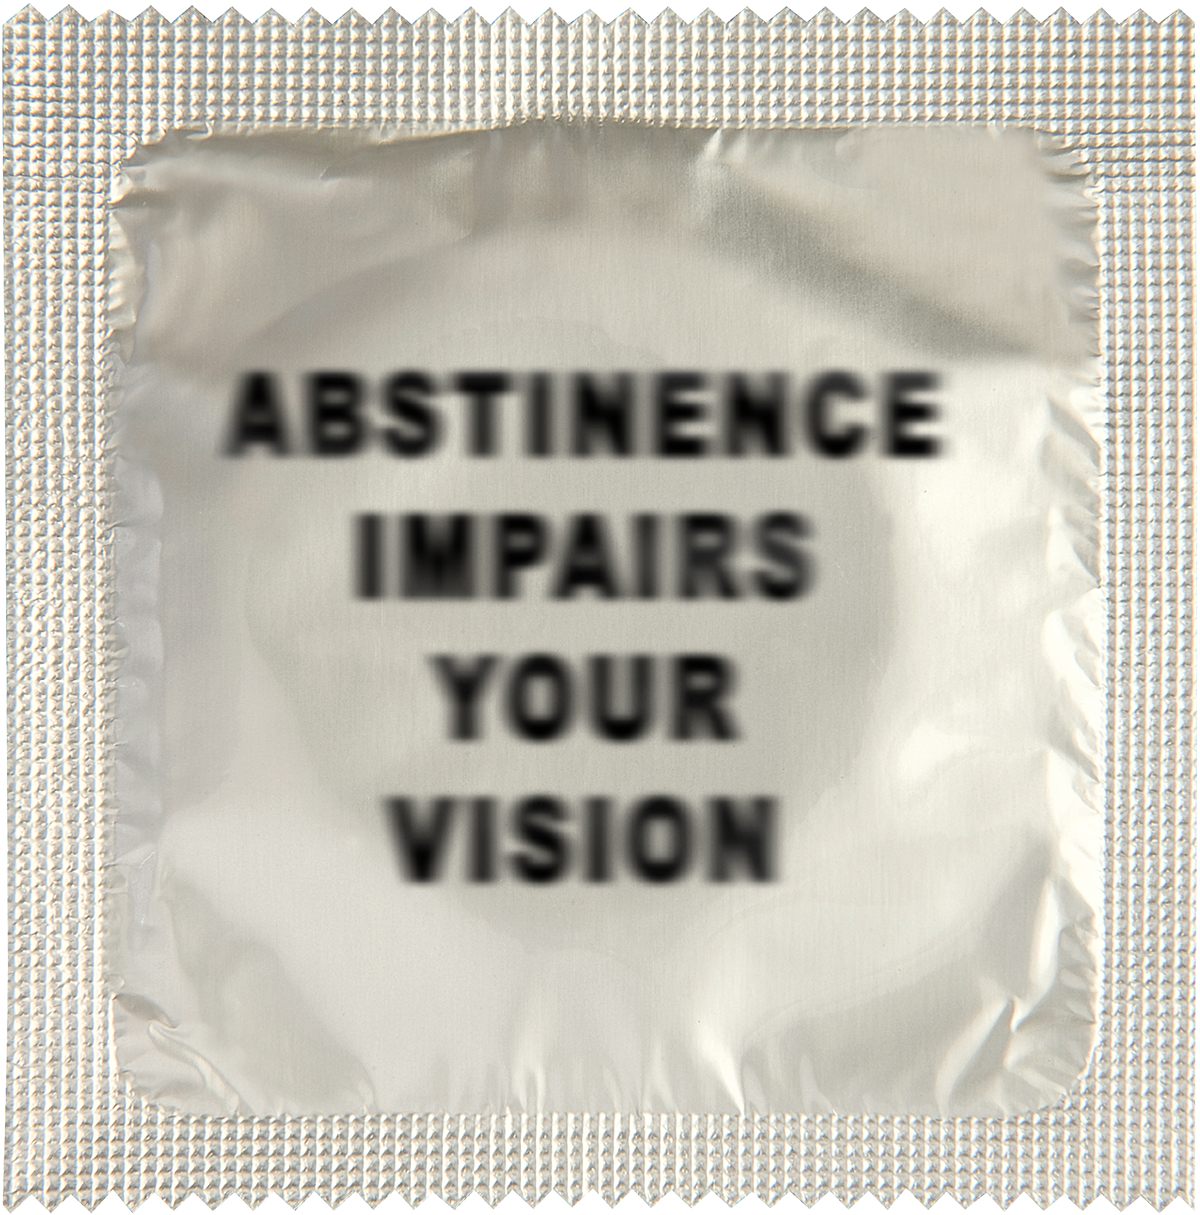 Image of funny condom "Abstinence Anglais"